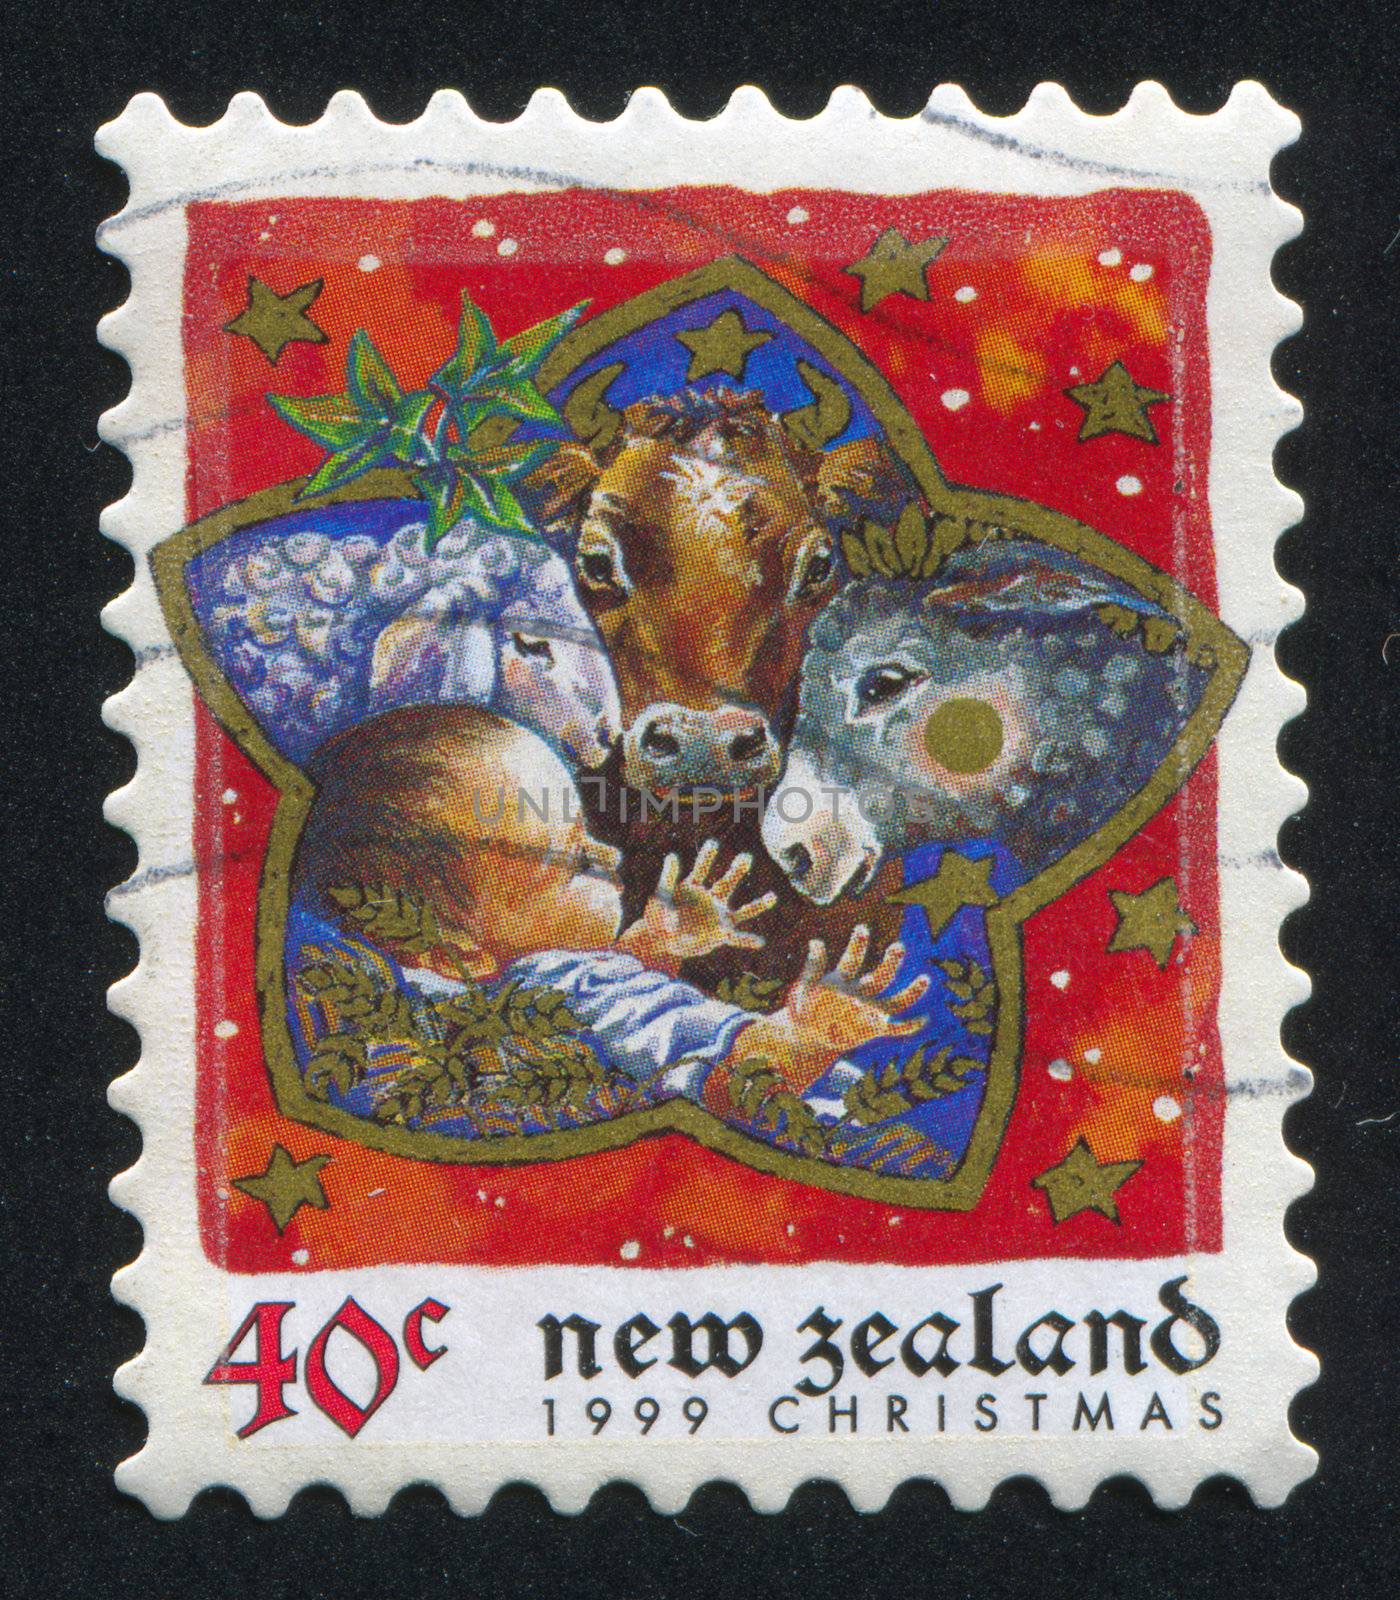 NEW ZEALAND - CIRCA 1999: stamp printed by New Zealand, shows Baby in Manger with Animals, circa 1999